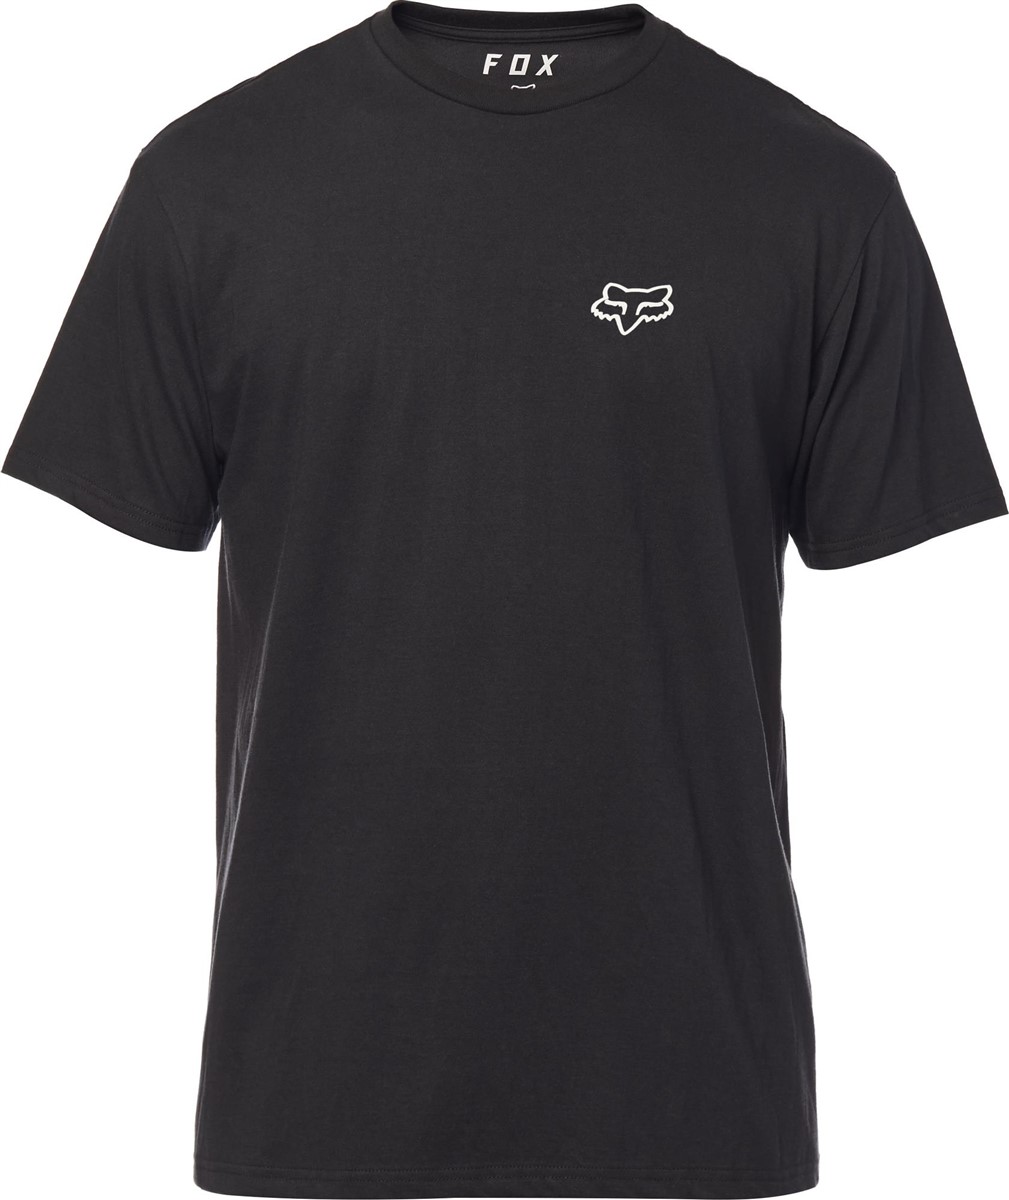 Fox Clothing Grifter Short Sleeve Premium Tee product image